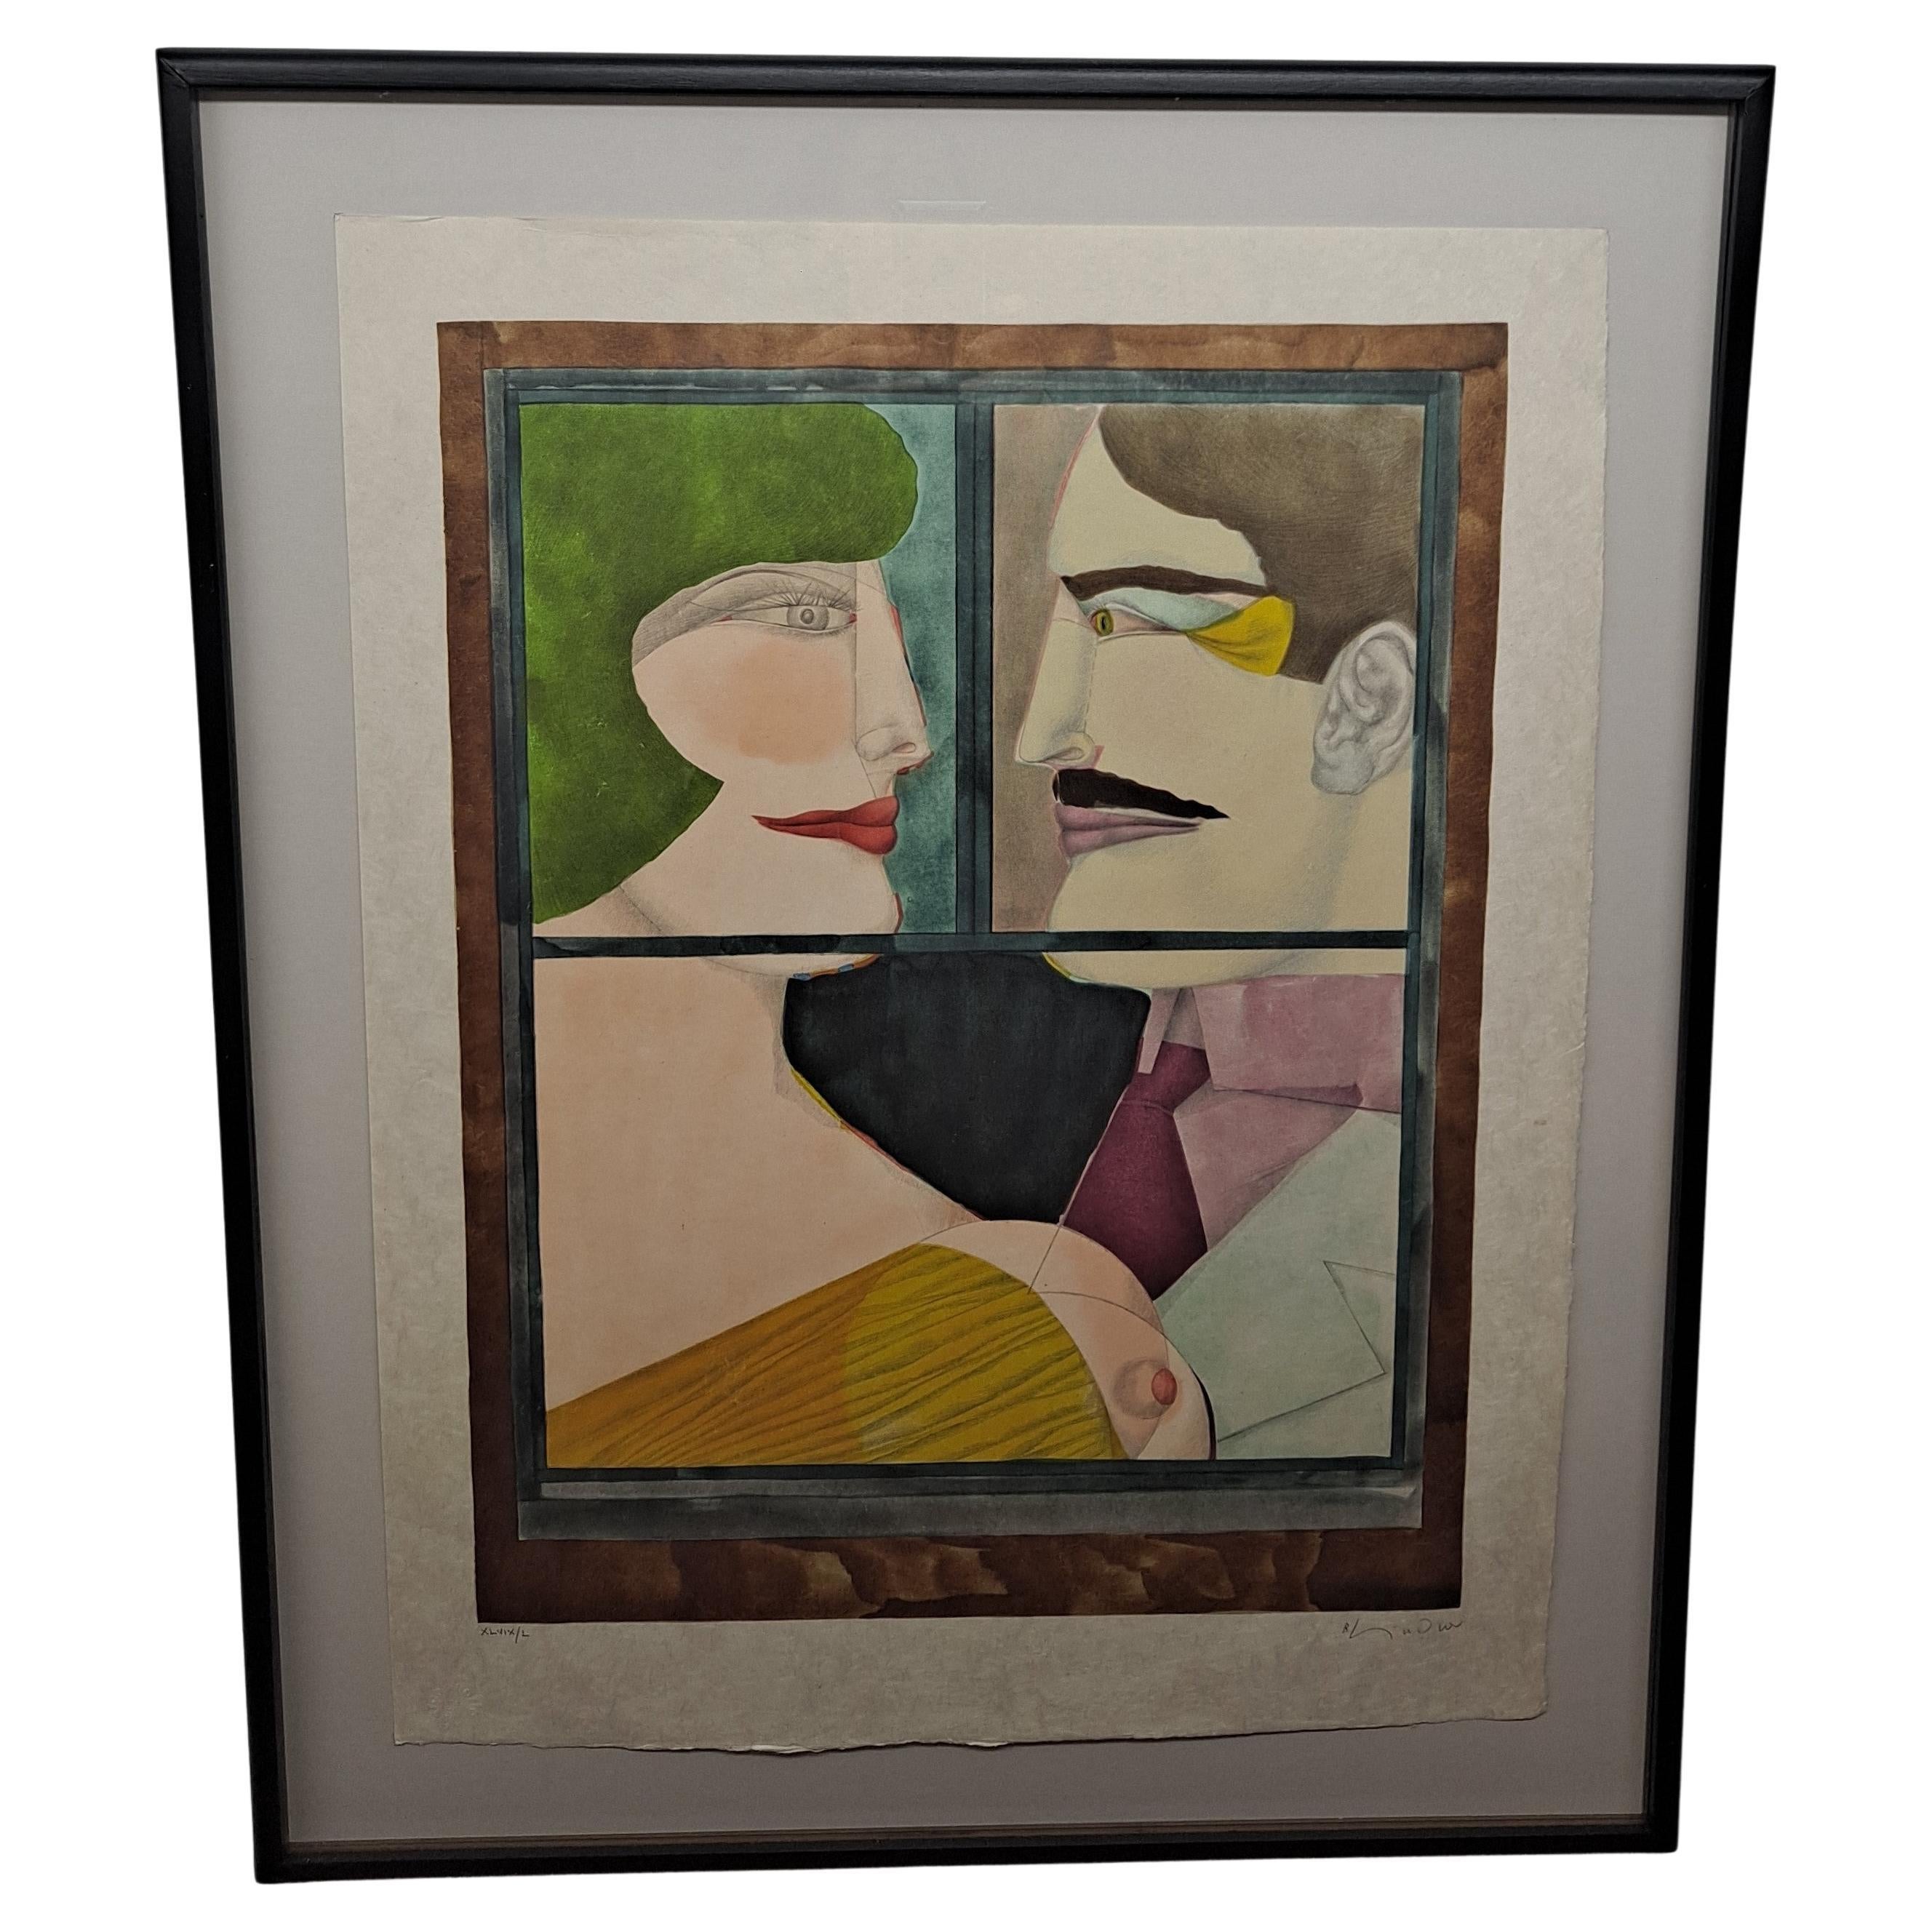 Richard Lindner (German American) 1901 - 1978 Lithograph Signed and Numbered 46/